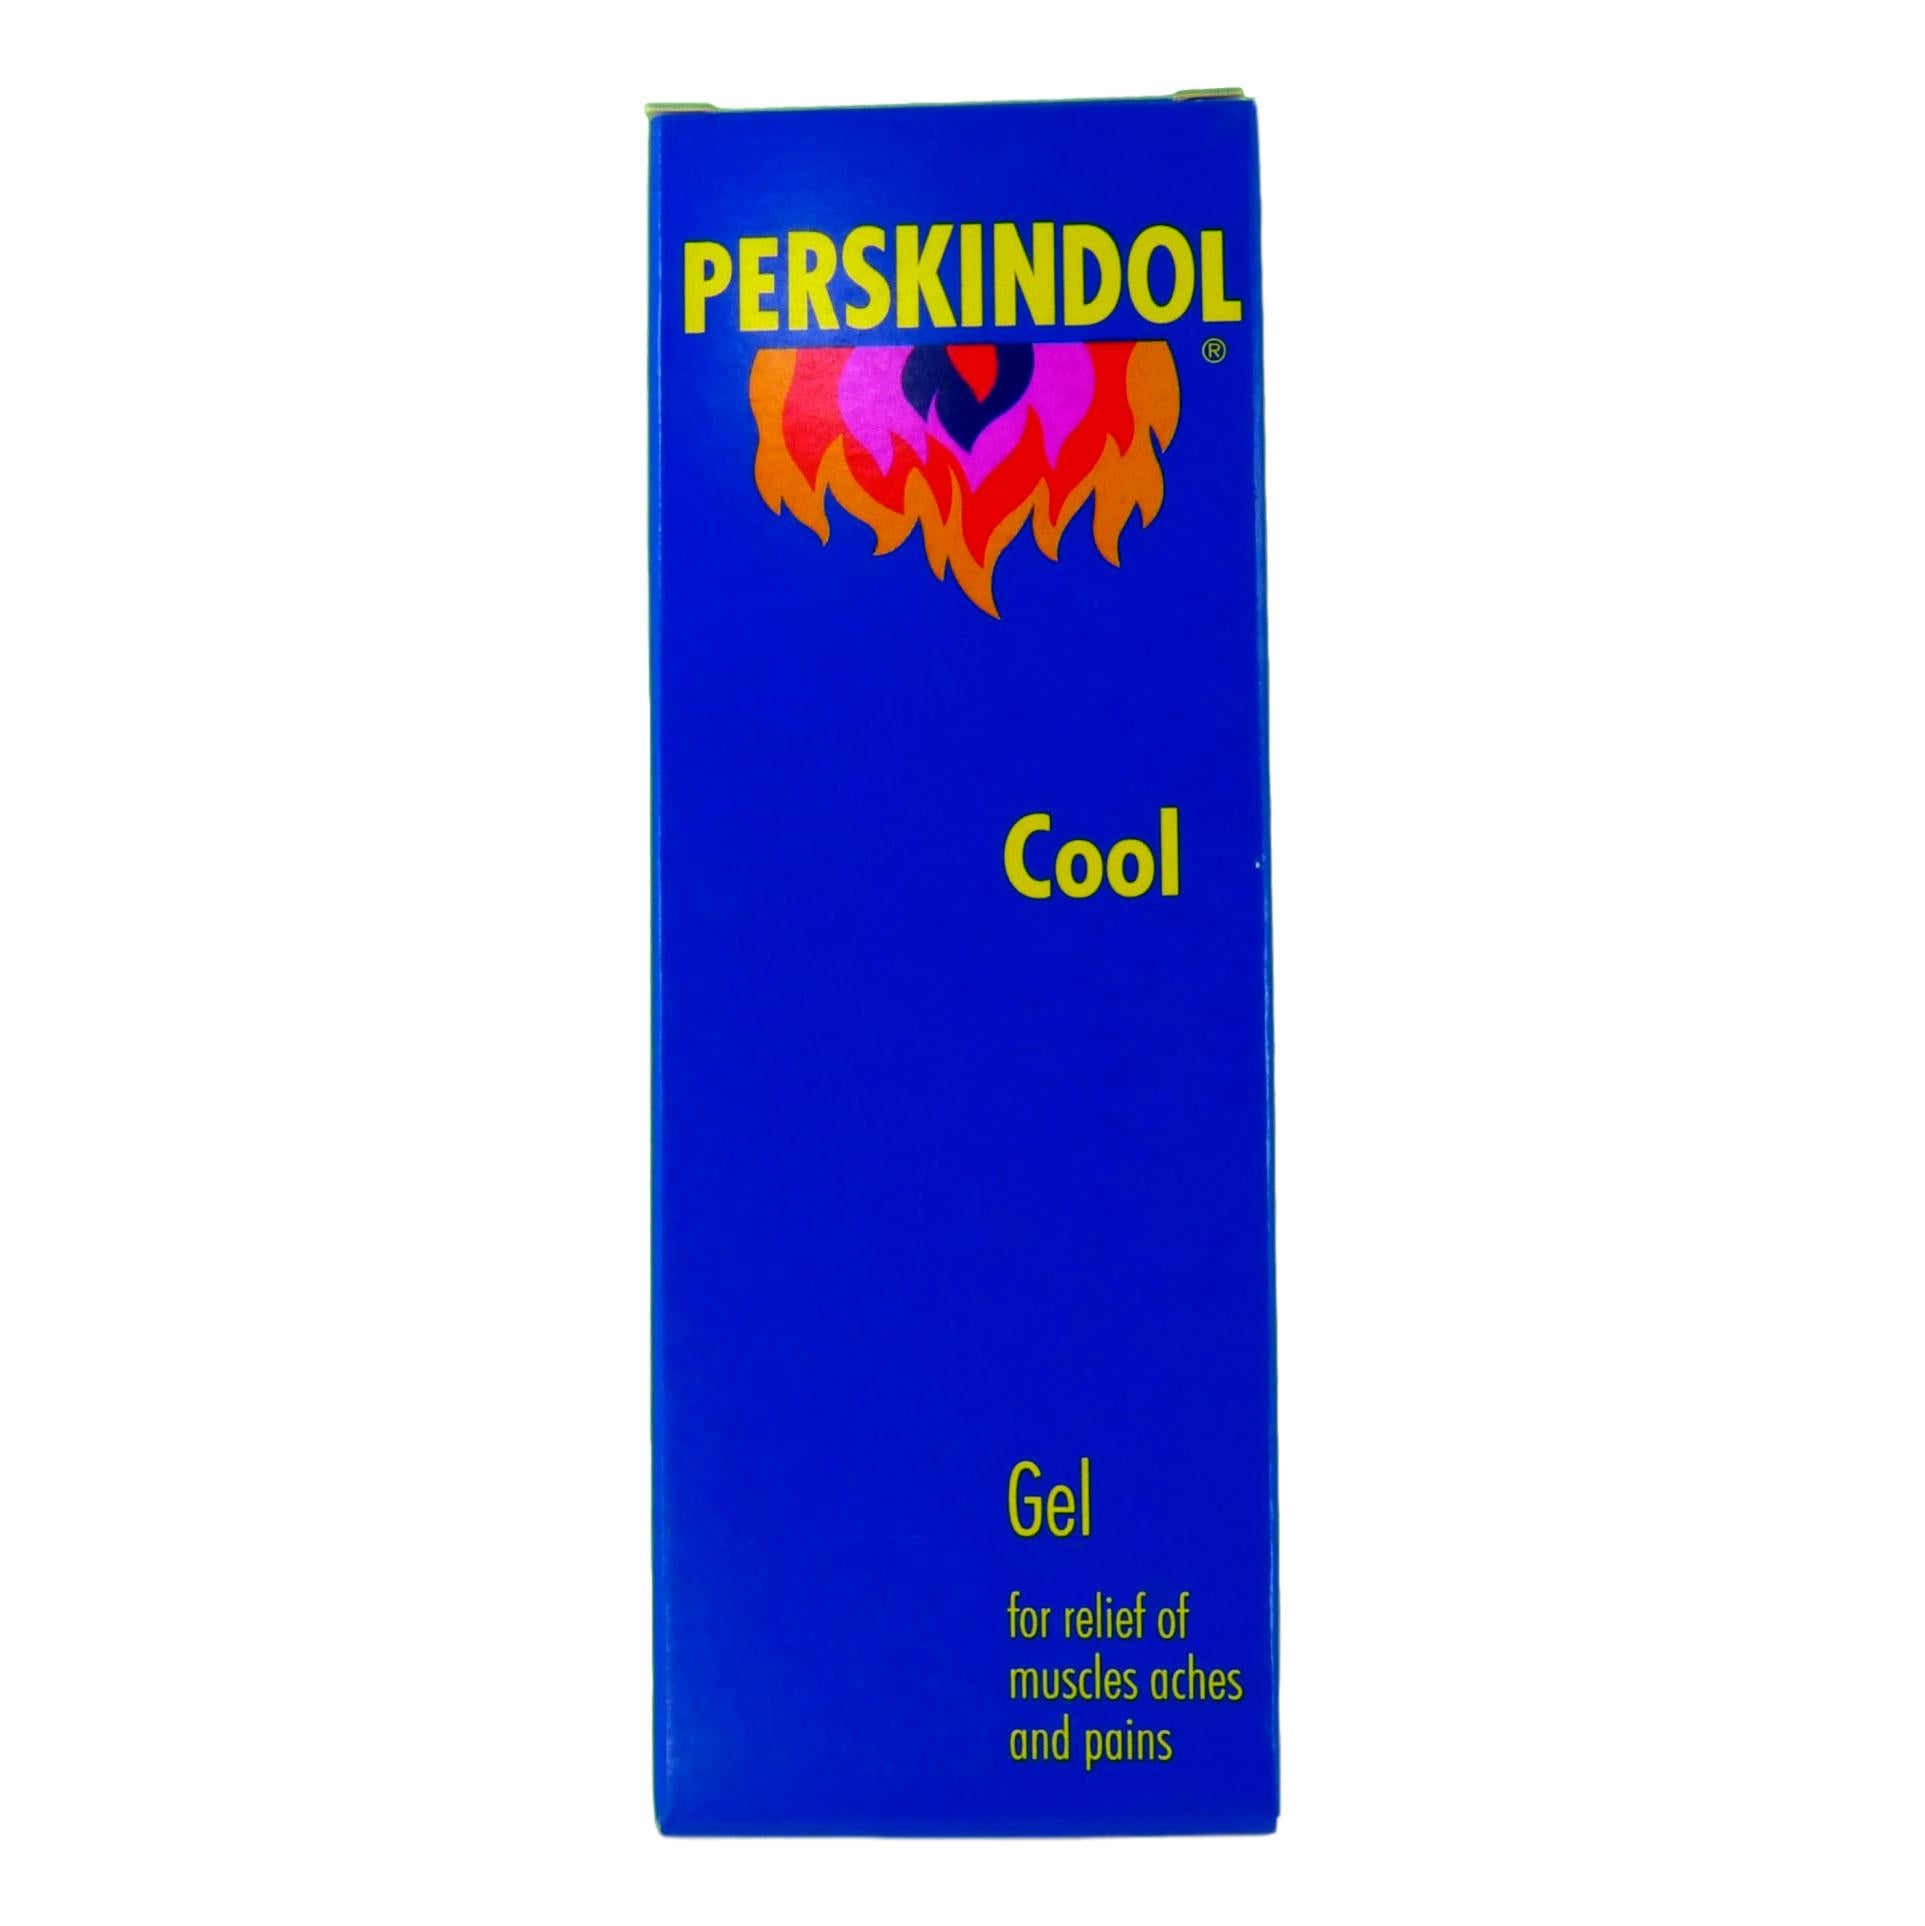 Perskindol Cool Gel for relief of muscle aches and pains 100ml 3.4oz - Asian Beauty Supply